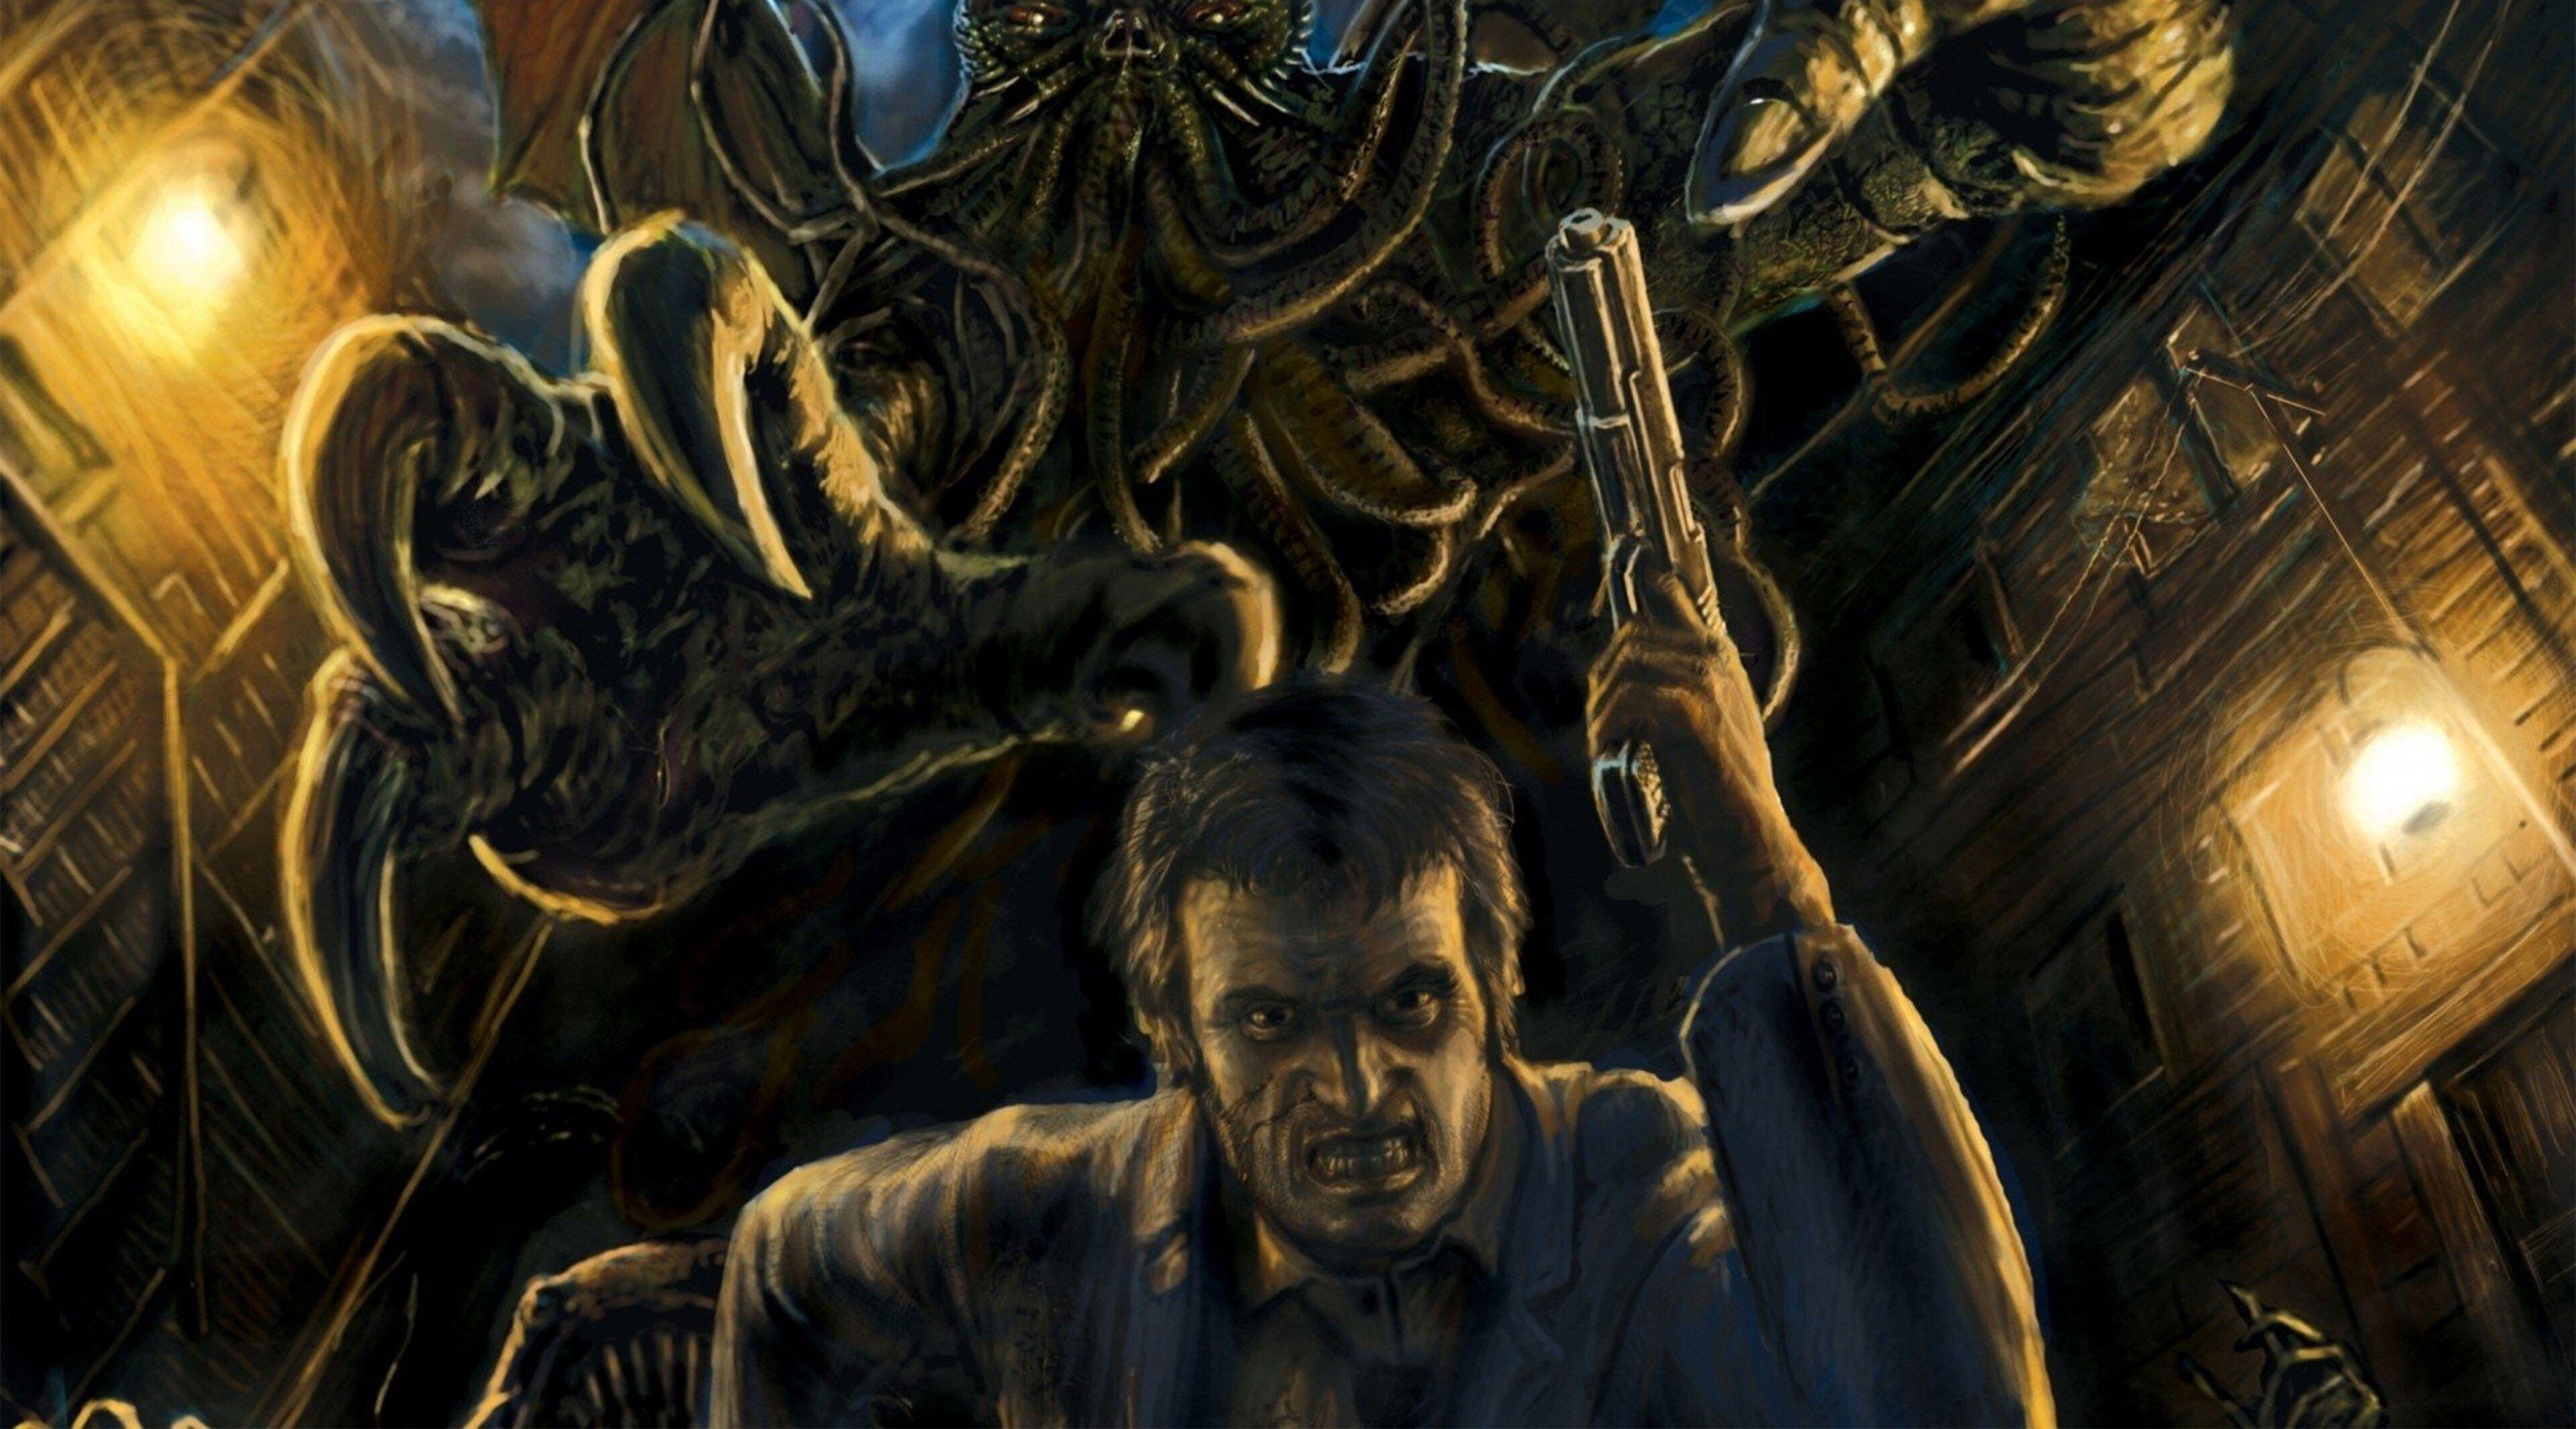 call of cthulhu the official video game 4k amazing wallpaper HD for desktop. Cthulhu, Cthulhu art, Computer wallpaper